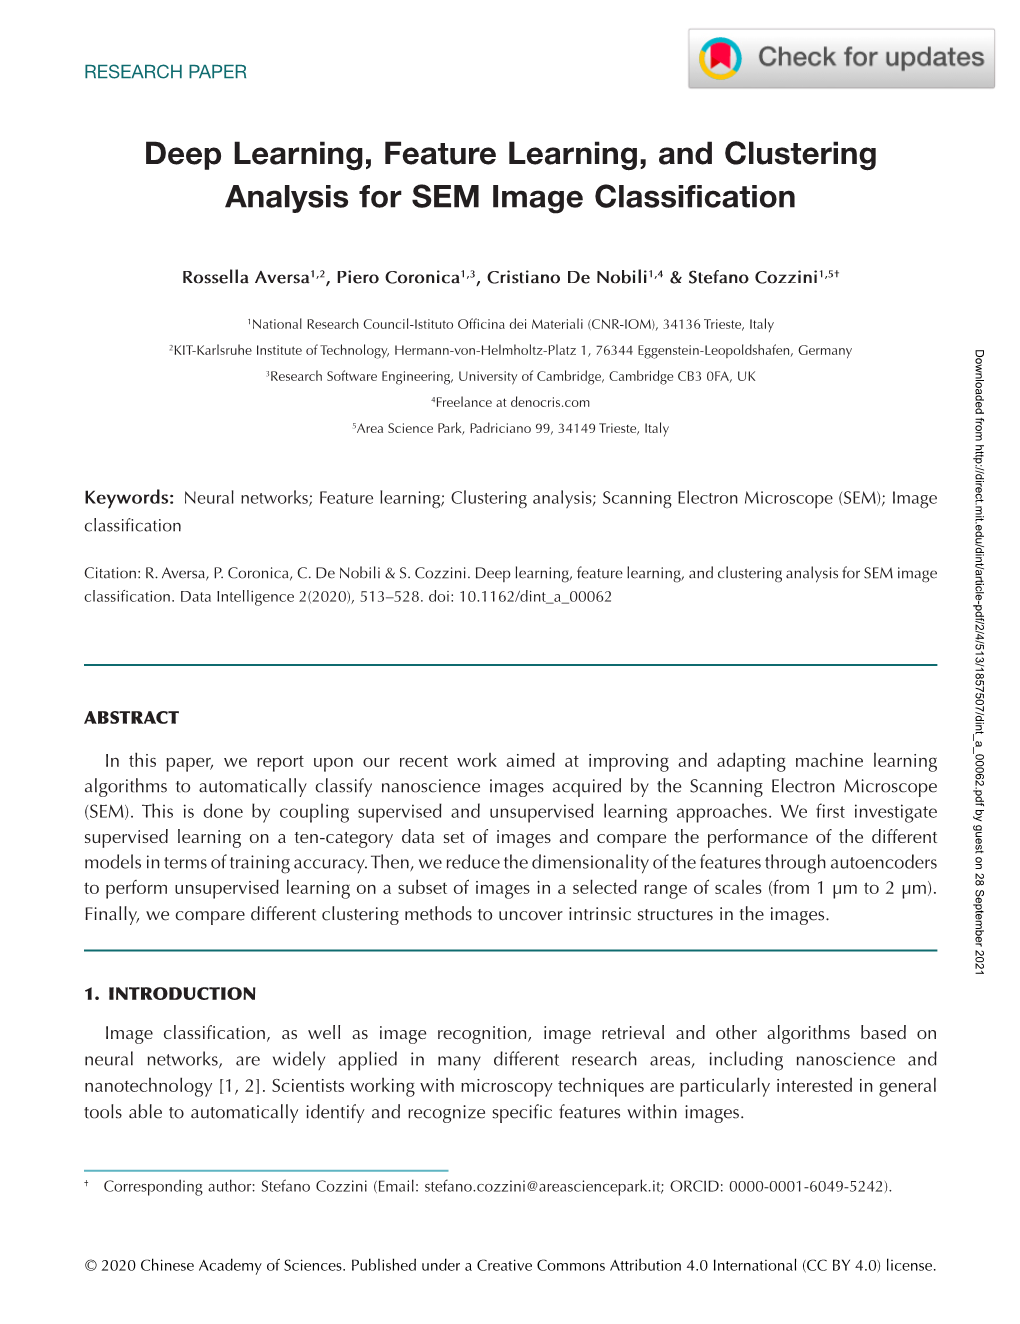 Deep Learning, Feature Learning, and Clustering Analysis for SEM Image Classification